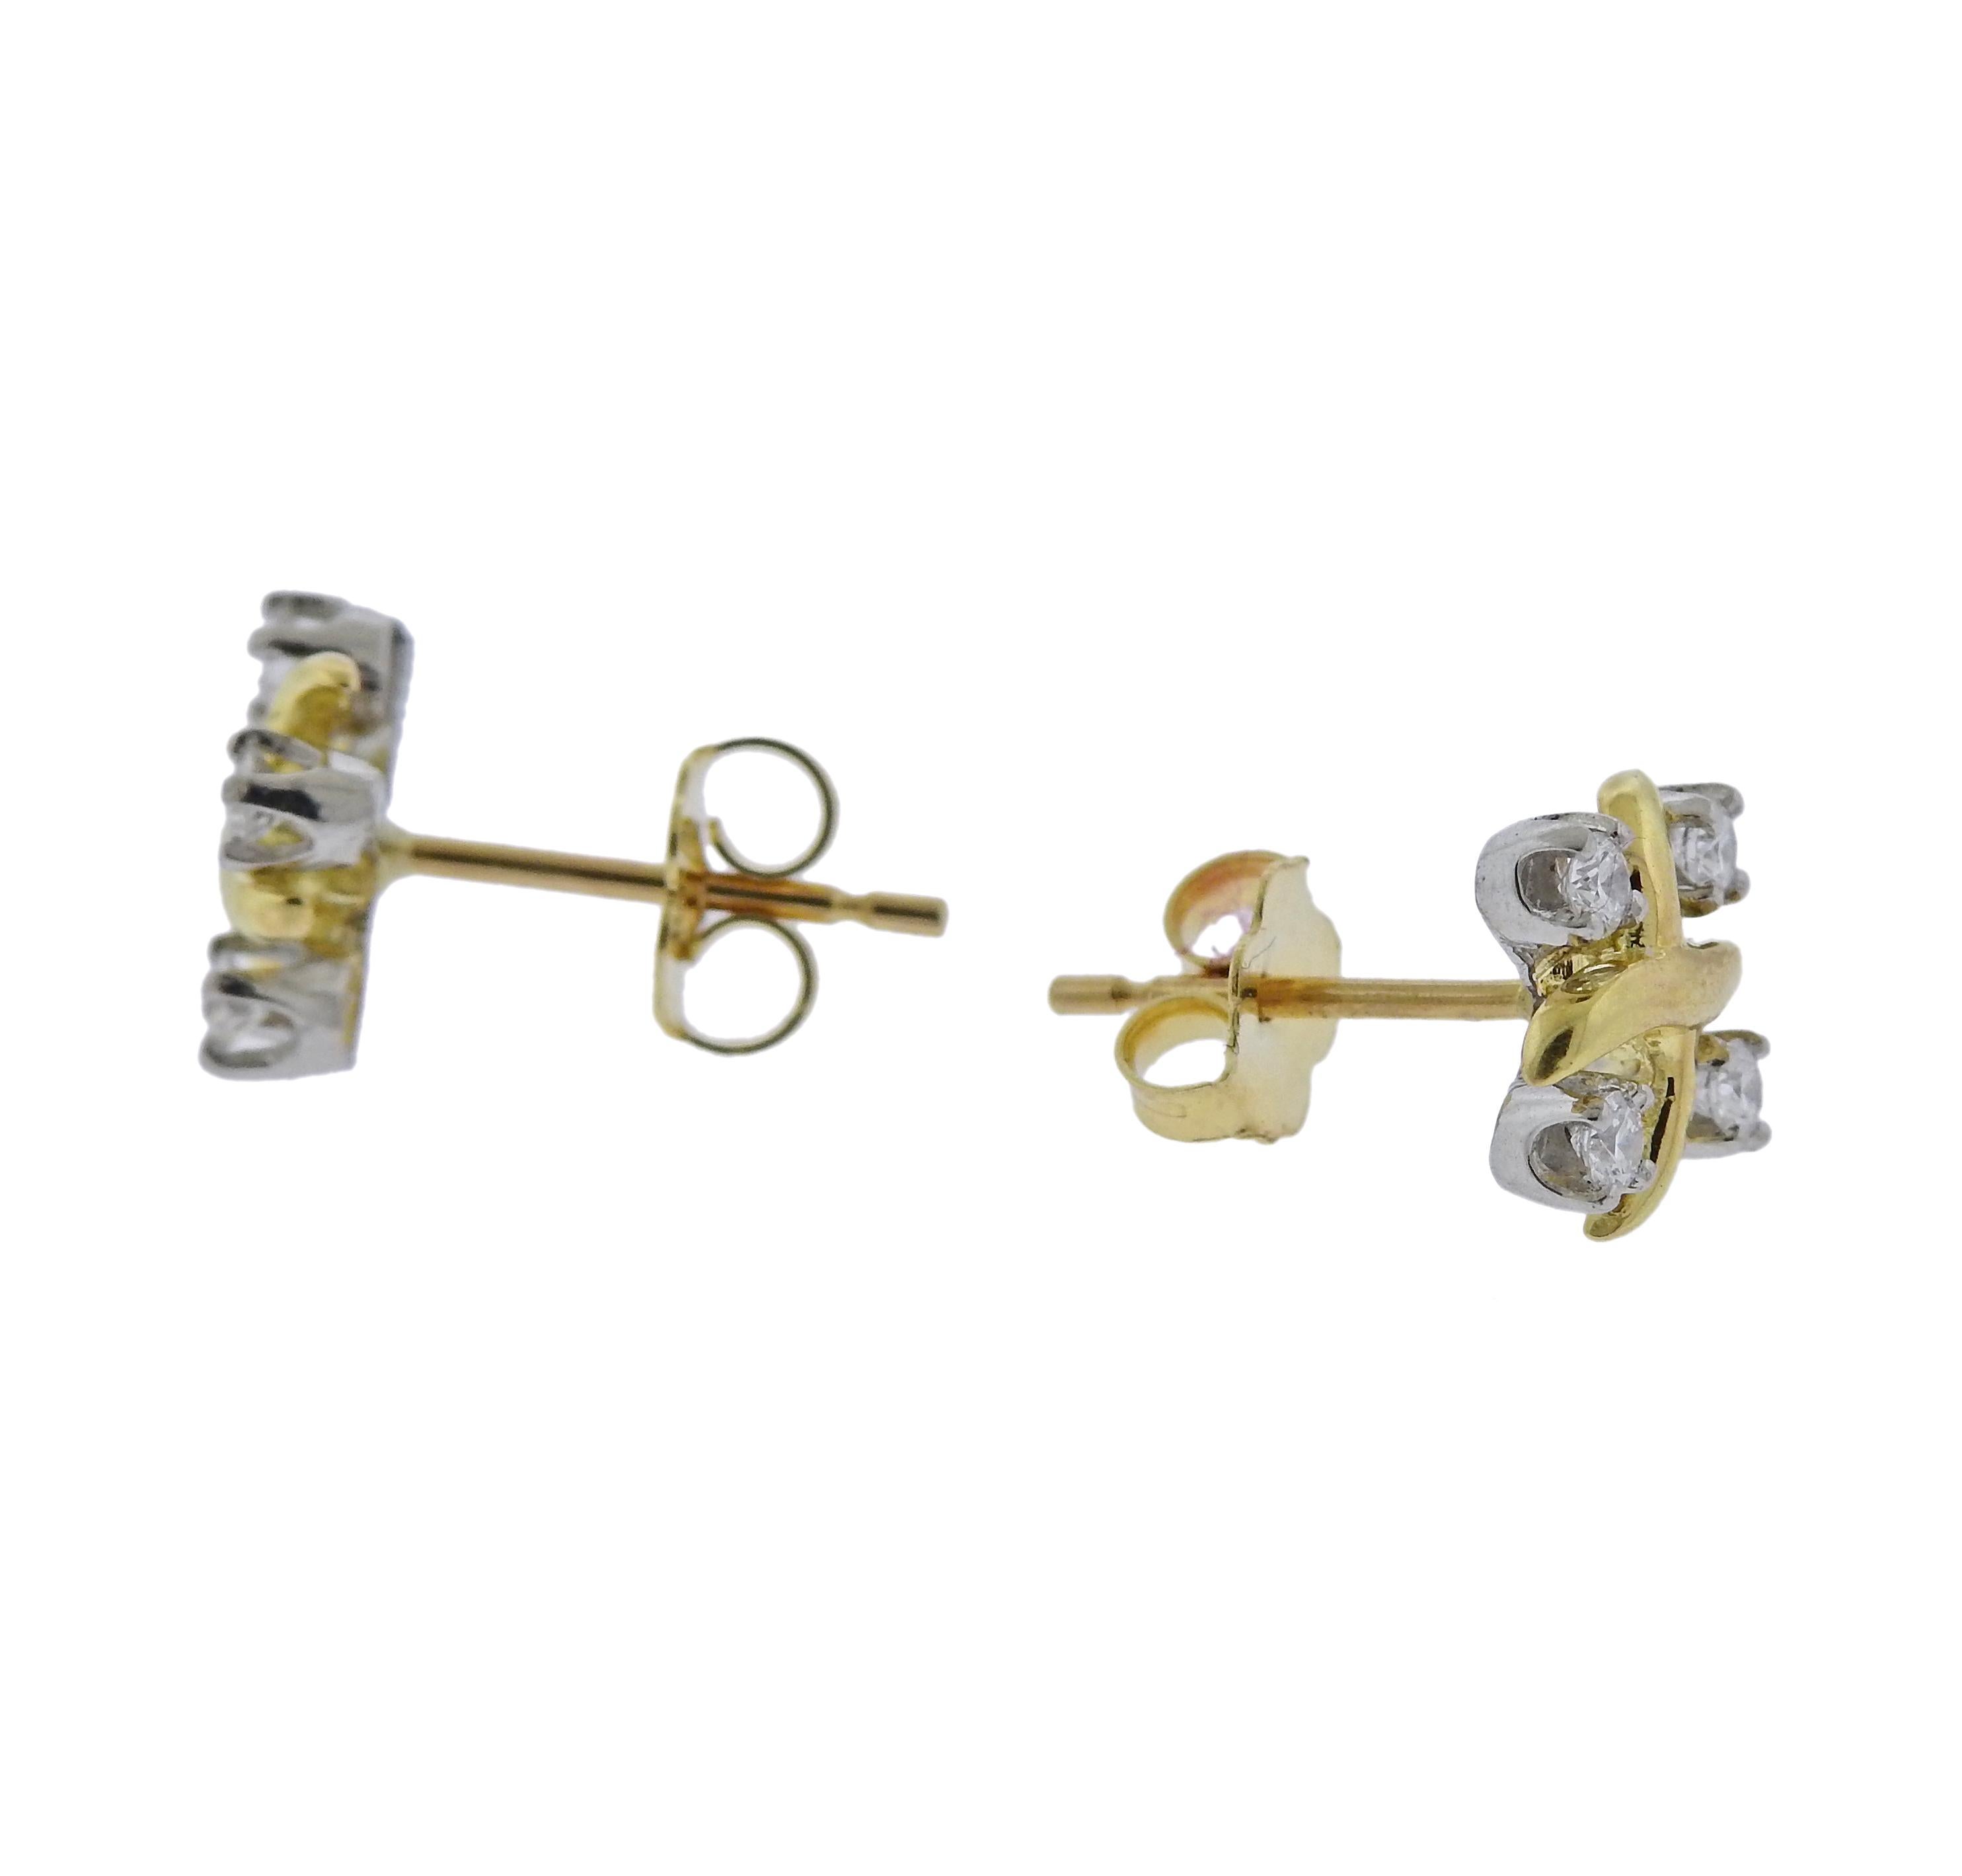 A pair of 18k gold and platinum stud earrings with 0.28ctw in G/VS diamonds, crafted by Jean Schlumberger for Tiffany & Co Lynn collection. Current retail $3000. Earrings are 10.3mm x 10.3mm and weigh 2.9 grams. Marked T & Co, pt950, JS Studios.
